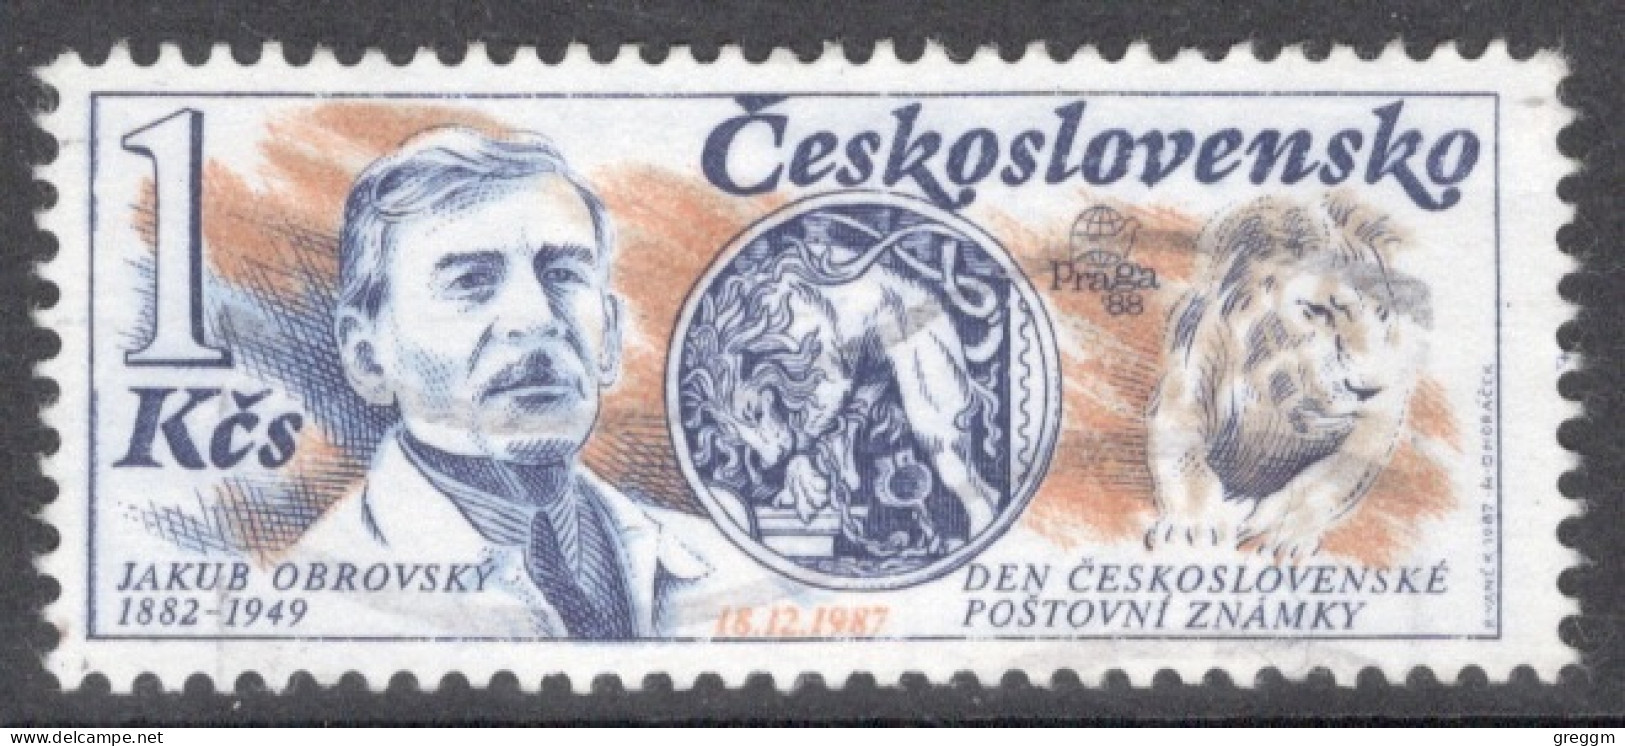 Czechoslovakia 1987 Single Stamp For The 105th Anniversary Of The Birth Of Jakub Obrovsky ,Stamp Designer In Fine Used - Gebraucht